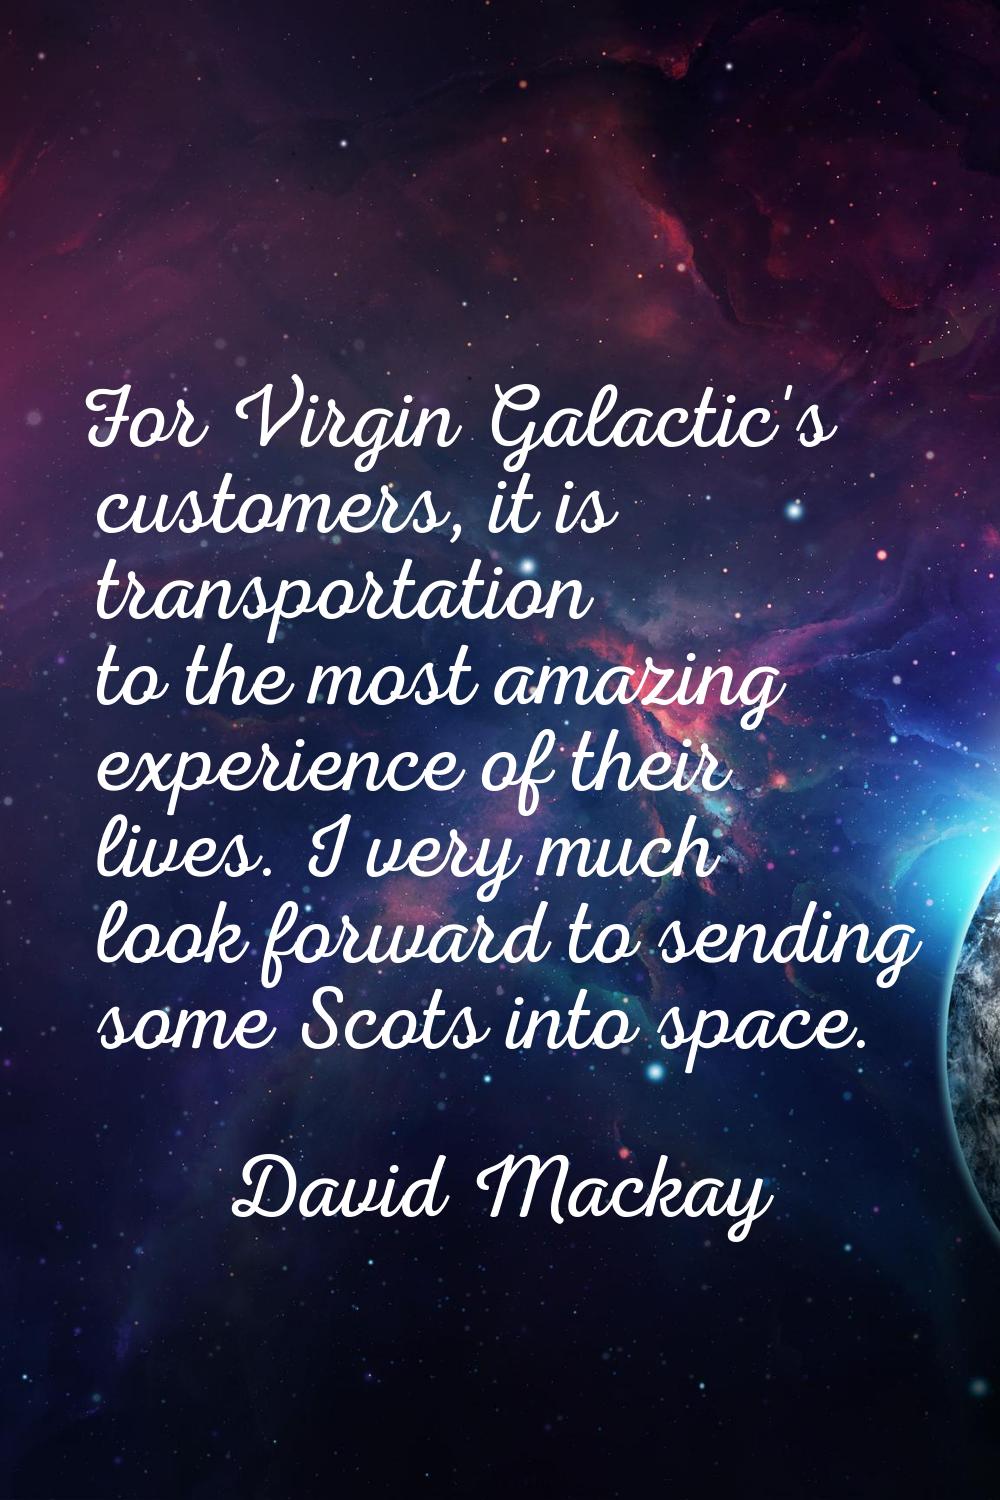 For Virgin Galactic's customers, it is transportation to the most amazing experience of their lives